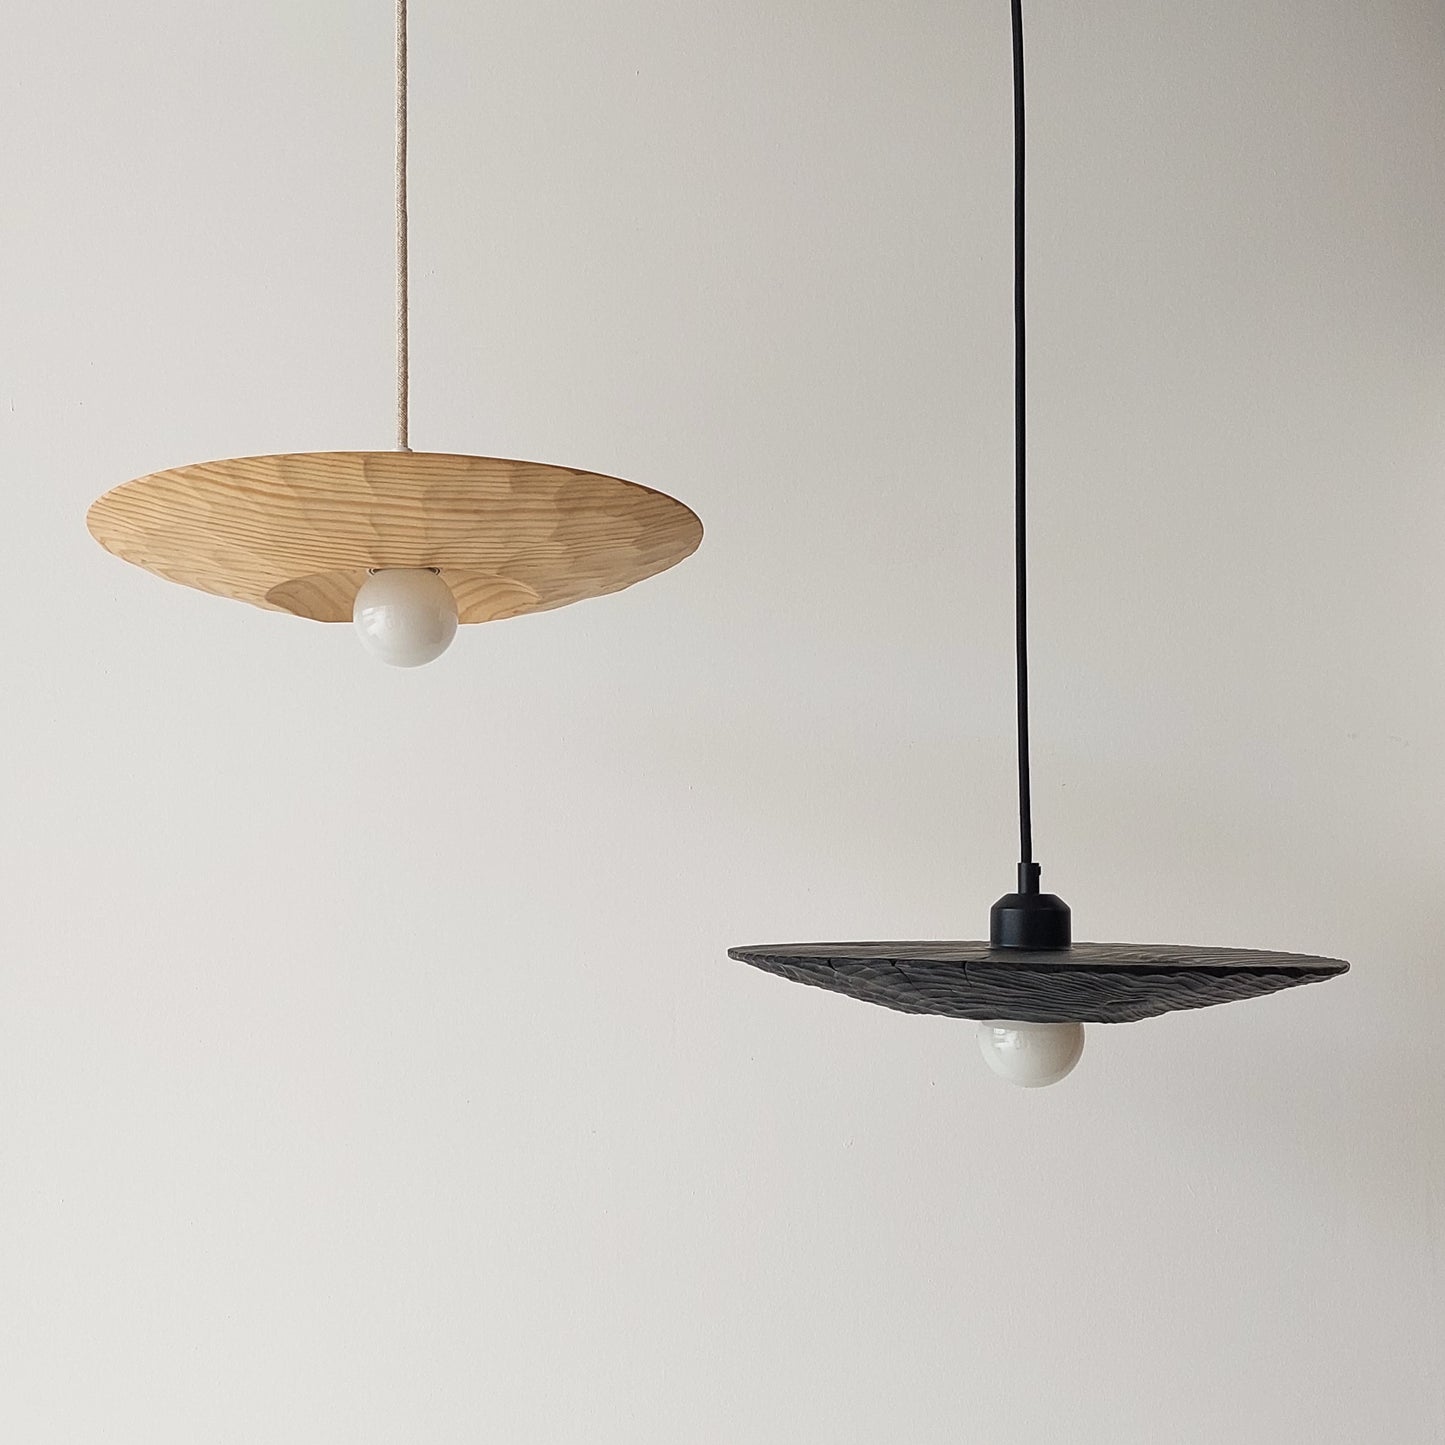 "There is no light without shadow" | Ceiling Lamp